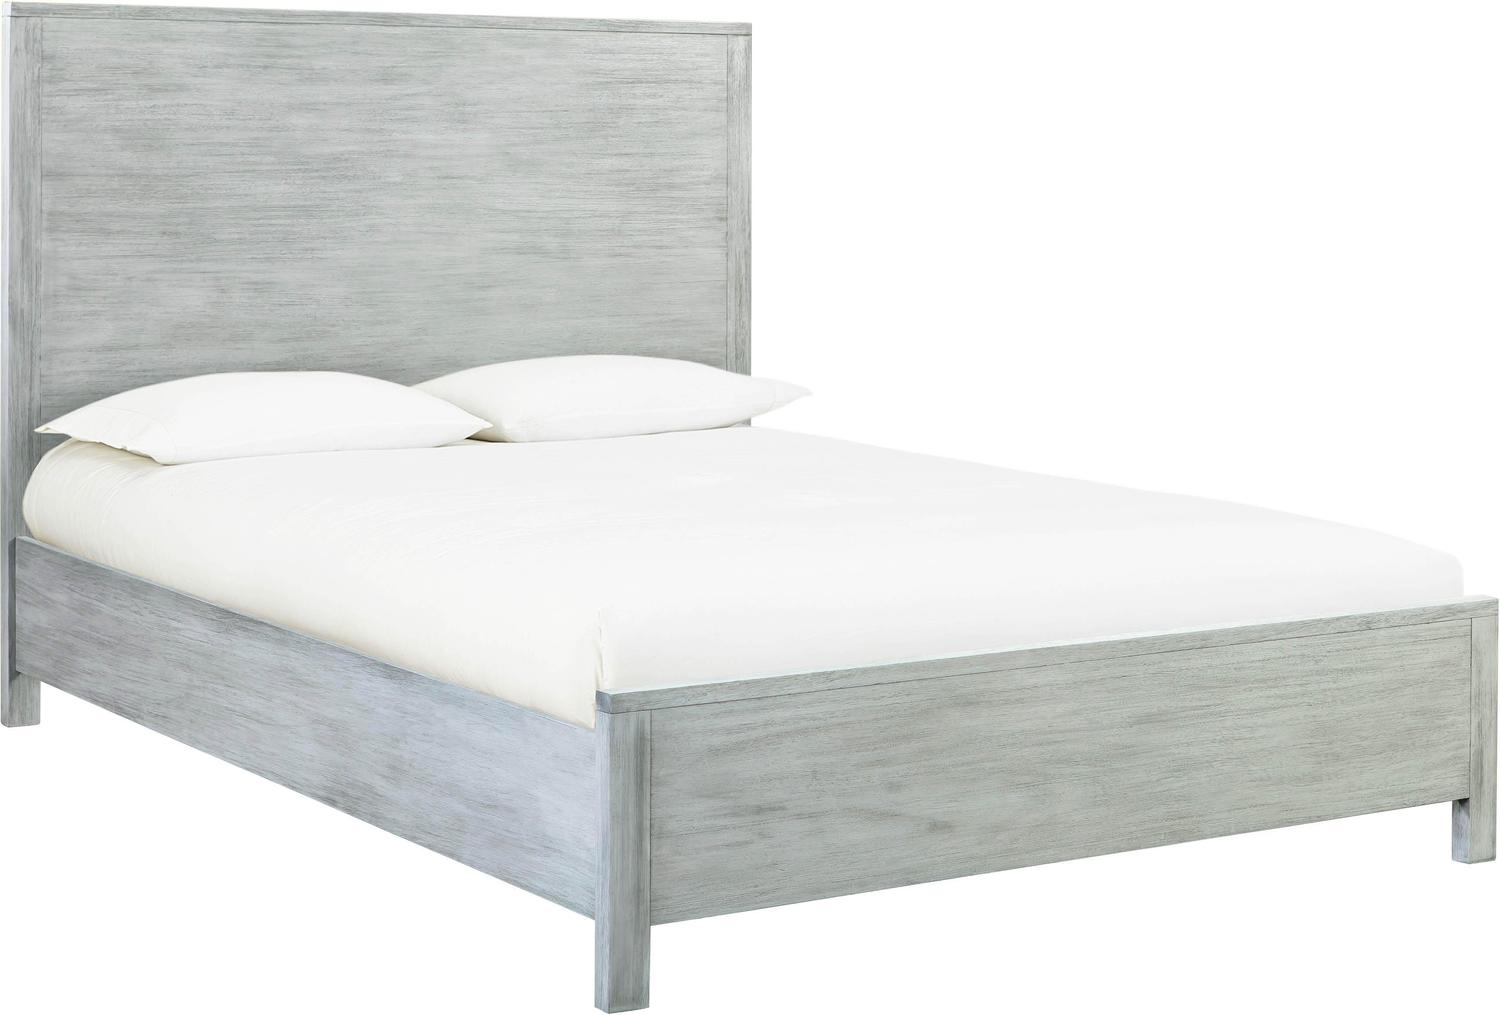 queen mattress for platform bed Contemporary Design Furniture Beds Grey Washed